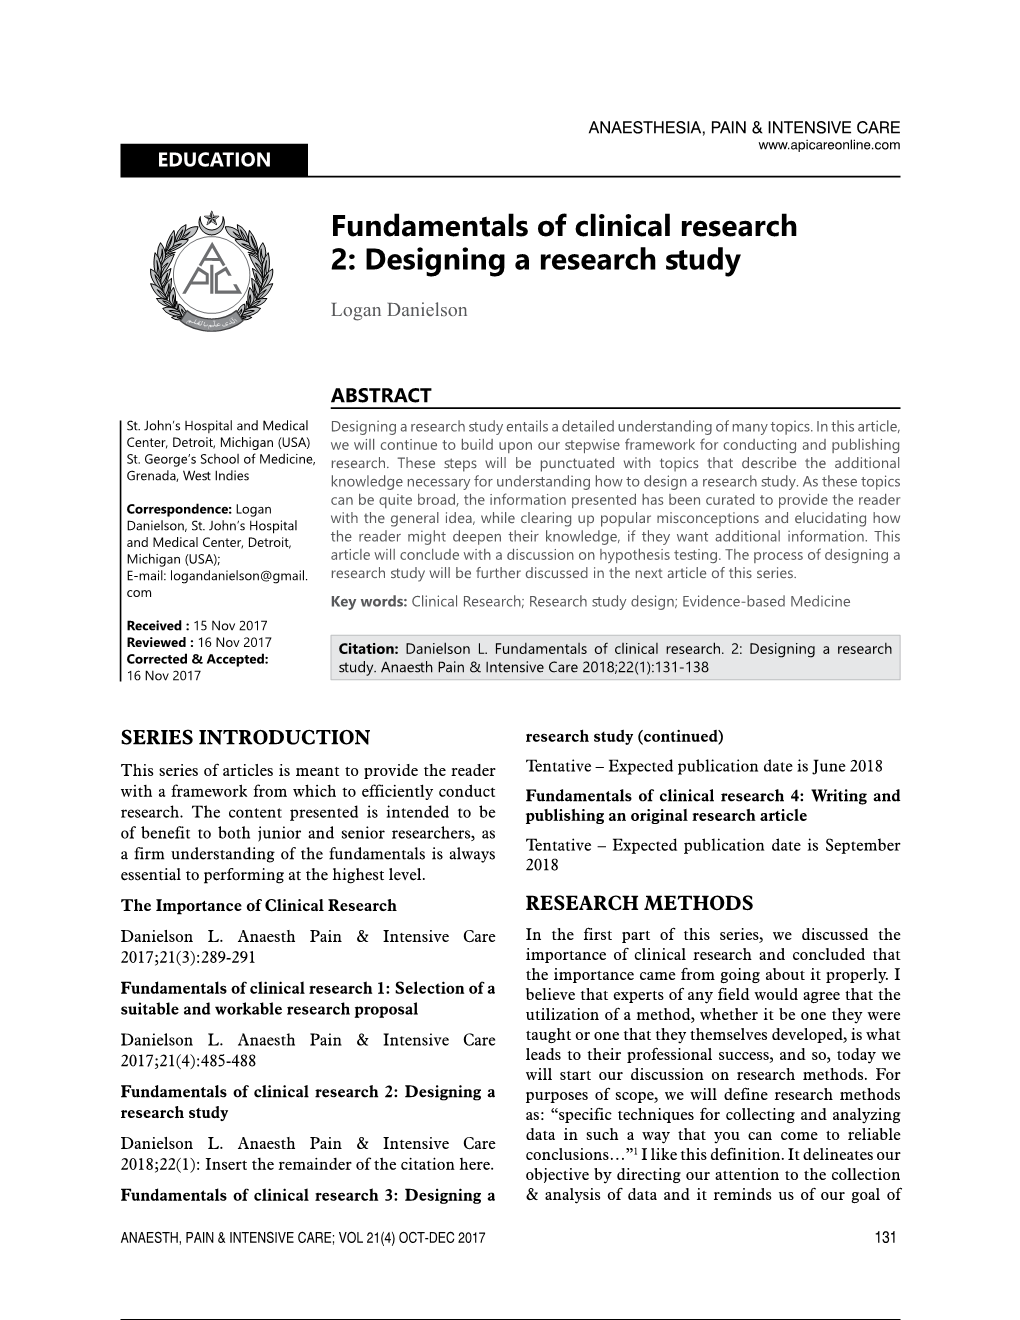 Fundamentals of Clinical Research 2: Designing a Research Study Logan Danielson